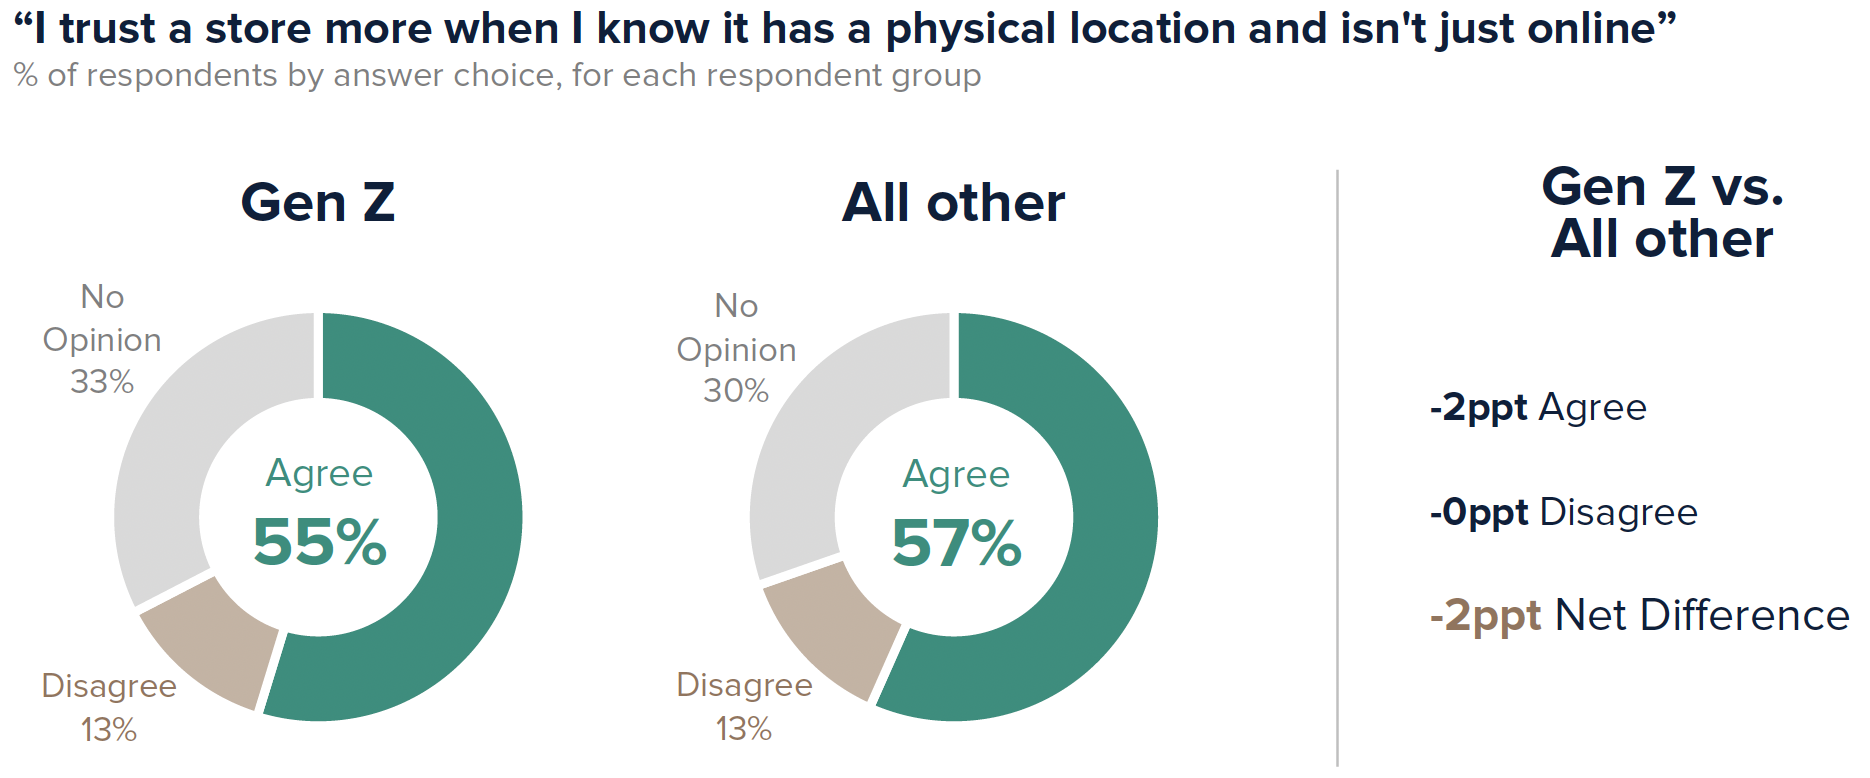 55% of Gen Z say “I trust a store more when I know it has a physical location and isn’t just online”